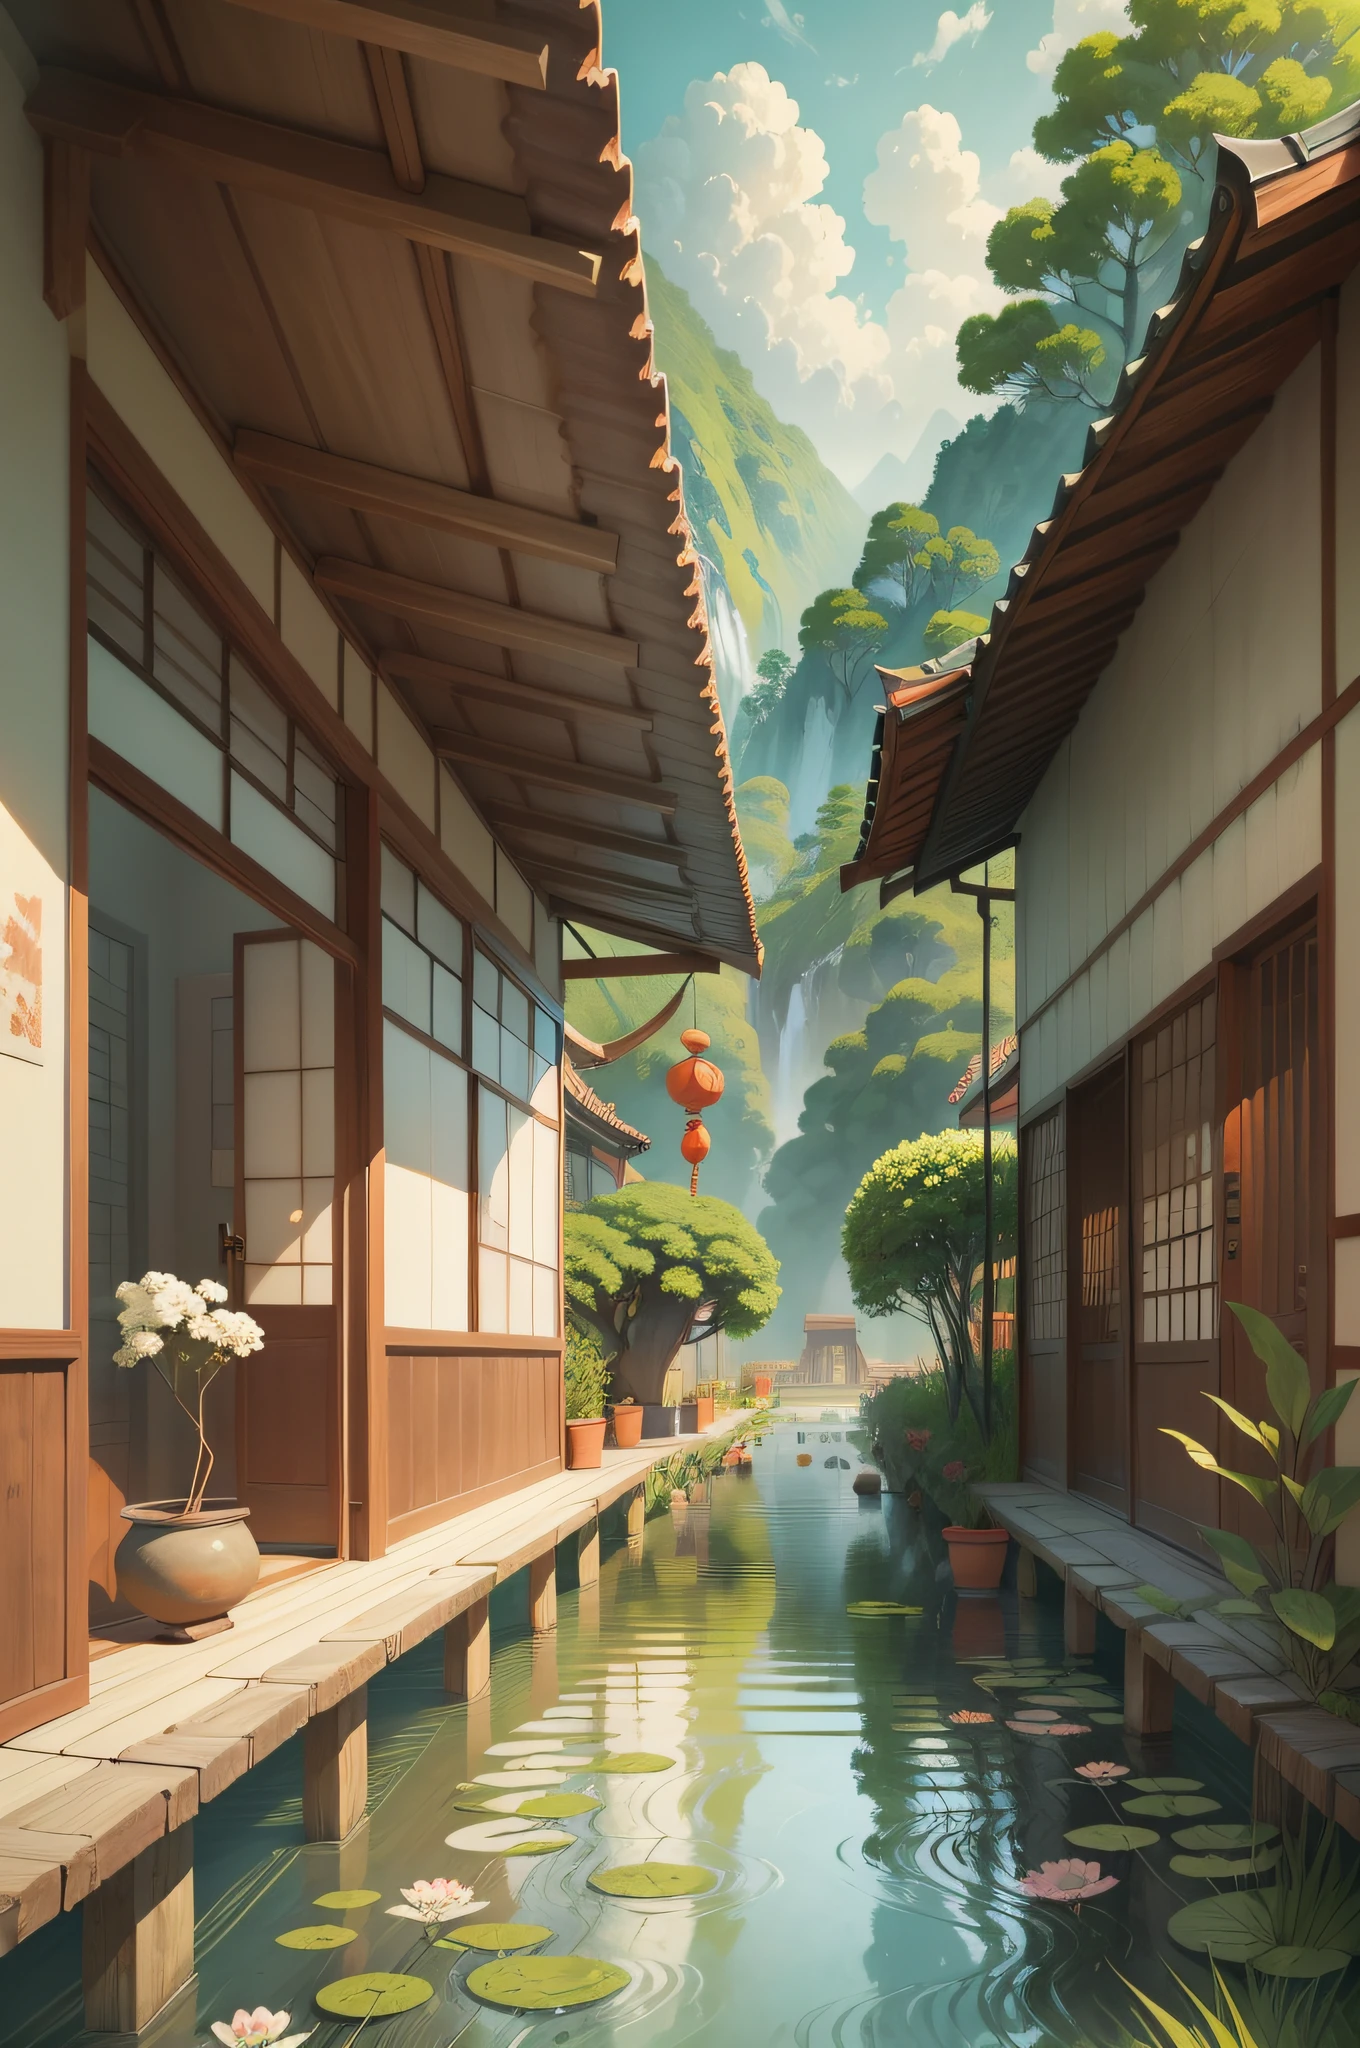 Grow rice in the water, A beautiful artwork illustration, Game illustration, serene illustration, Chinese watercolor style, by Yang J, Japanese inspired poster, artwork in the style of z.Show on the. gu, author：Xia Gui, G Liulian art style, Poster illustration, author：Fan Qi, environment design illustration, illustration concept art, author：Qu Leilei